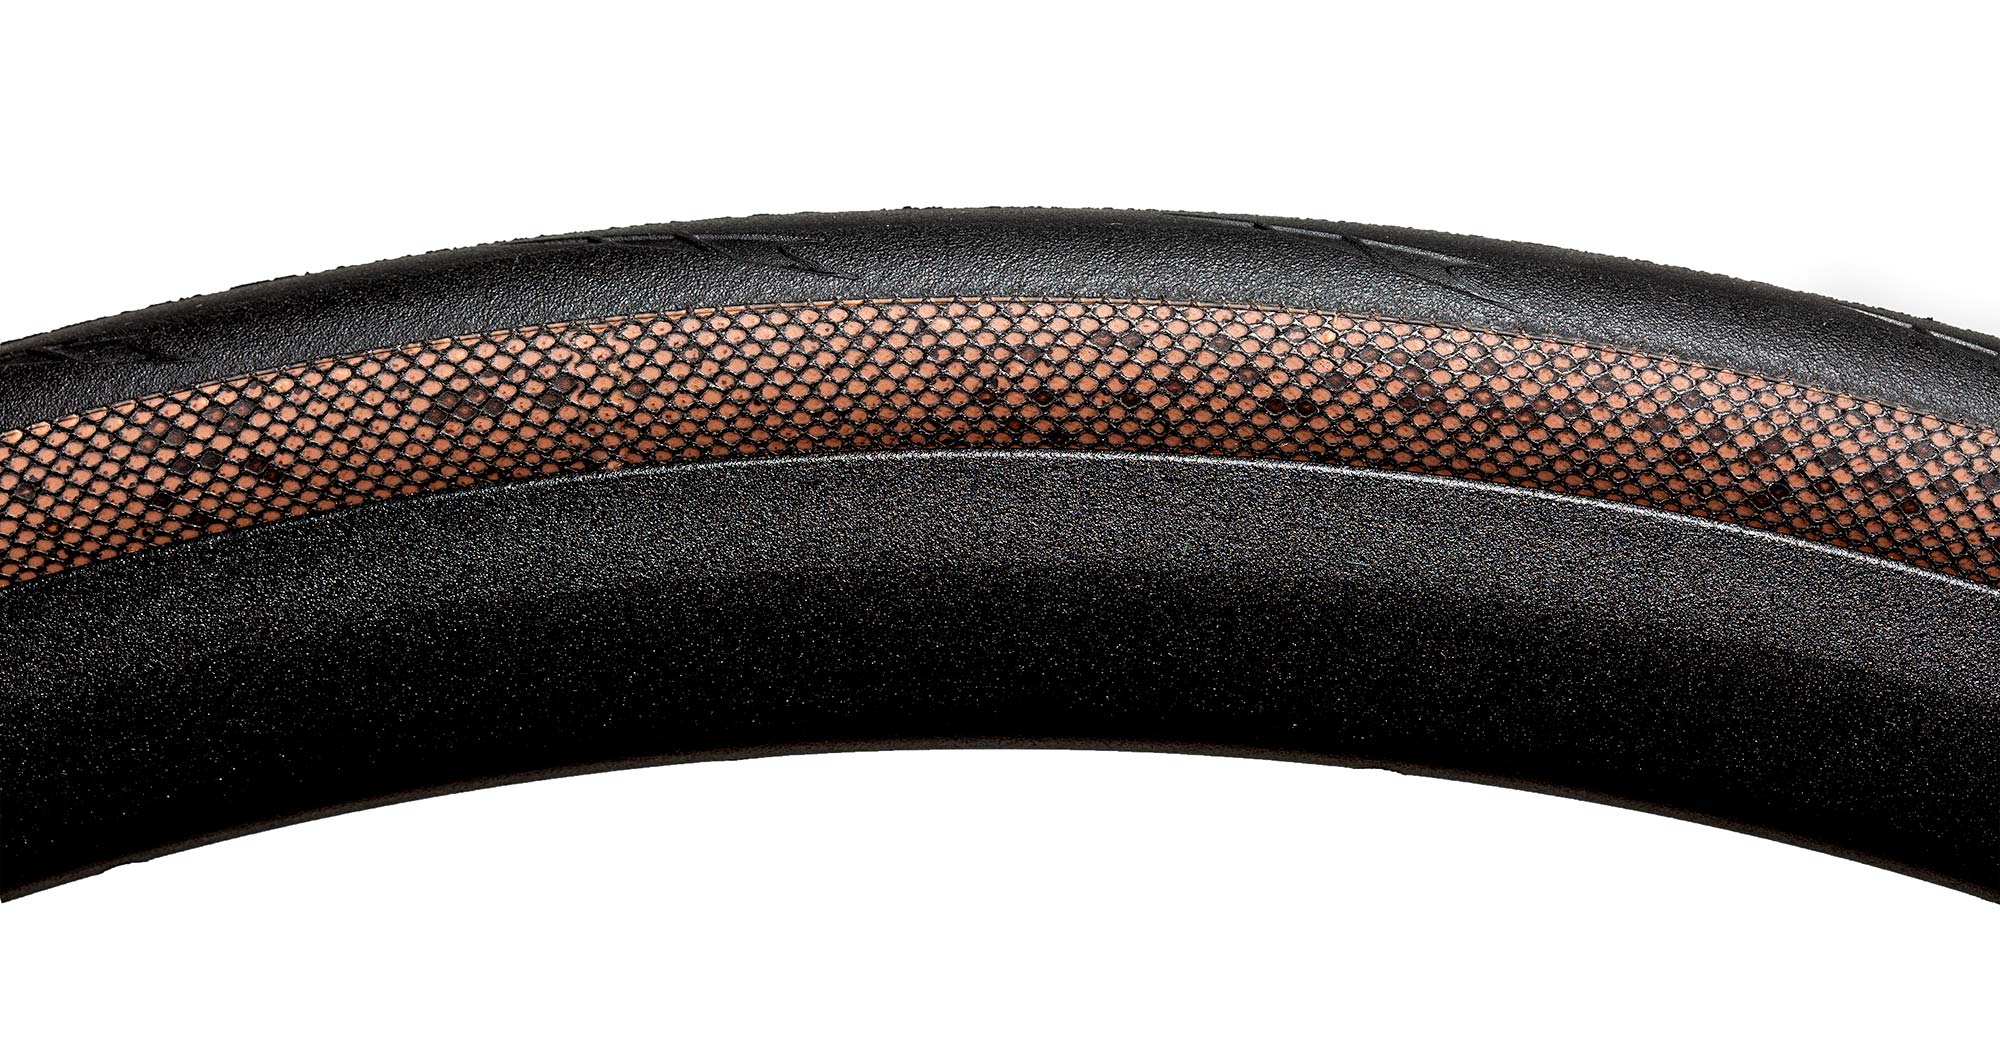 Hutchinson Gridskin lightweight reinforced sustainable gravel road bike tires, Fusion 5